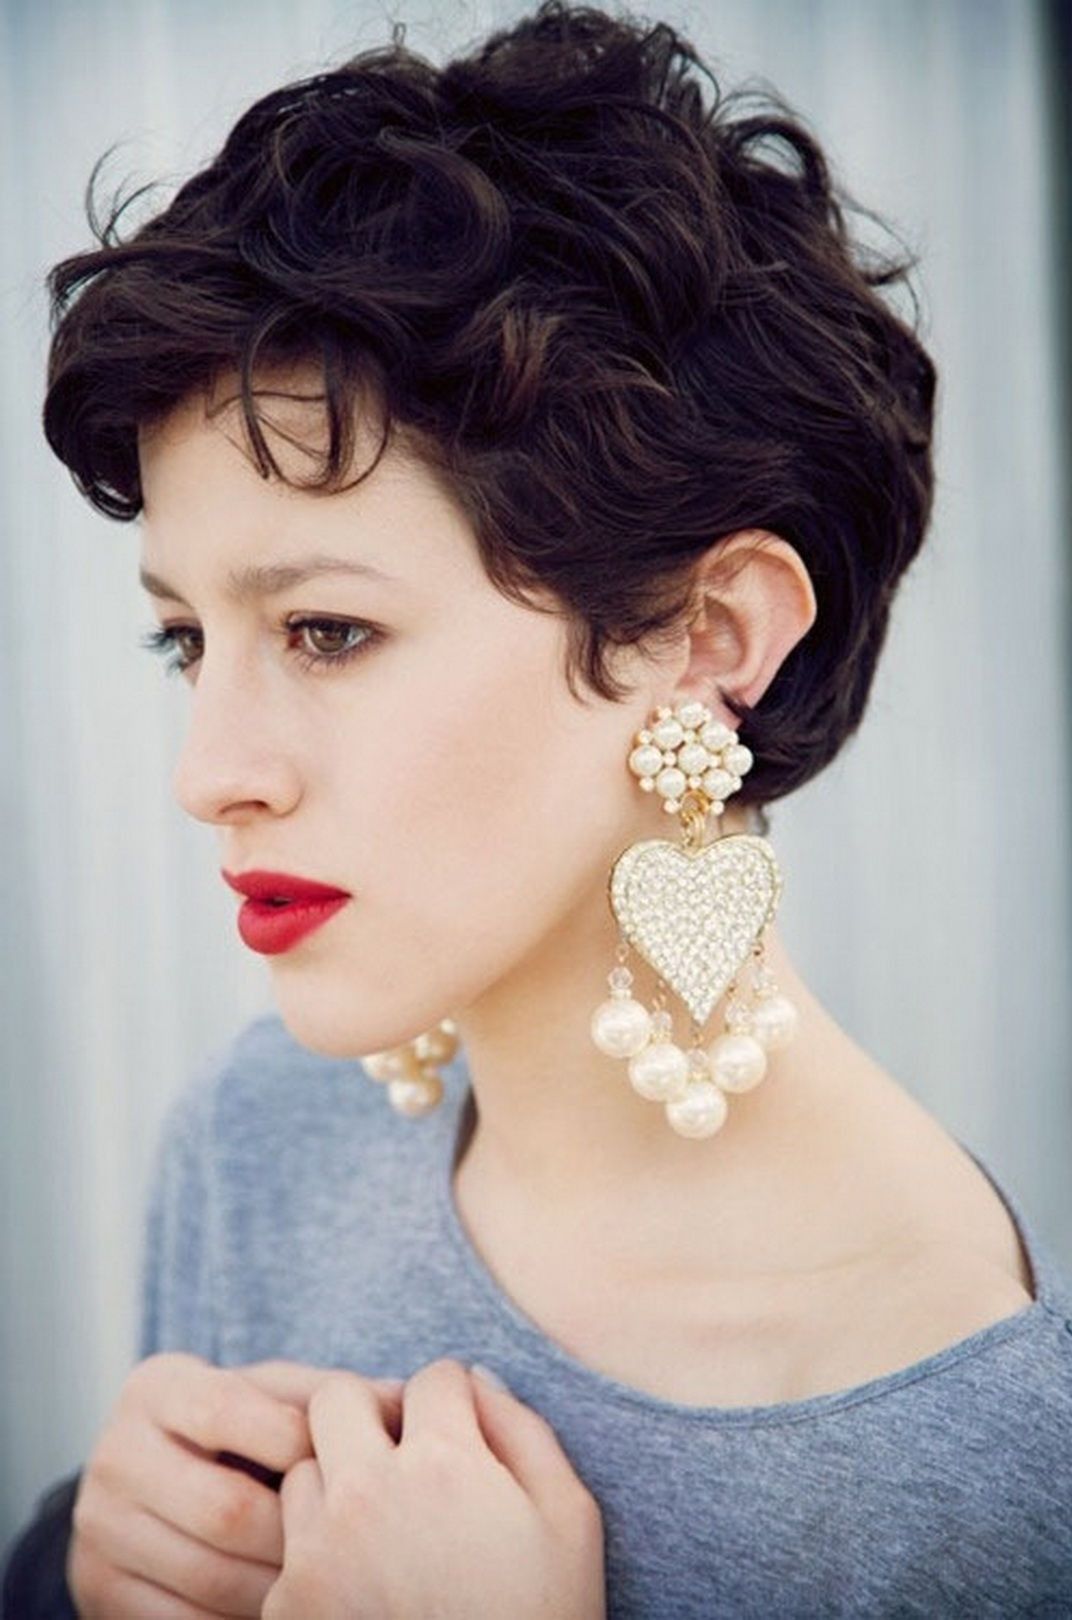 Best Short Curly Hair Pixie Round Face Pixie Haircuts For Round Regarding Most Up To Date Short Pixie Hairstyles For Curly Hair (View 9 of 15)